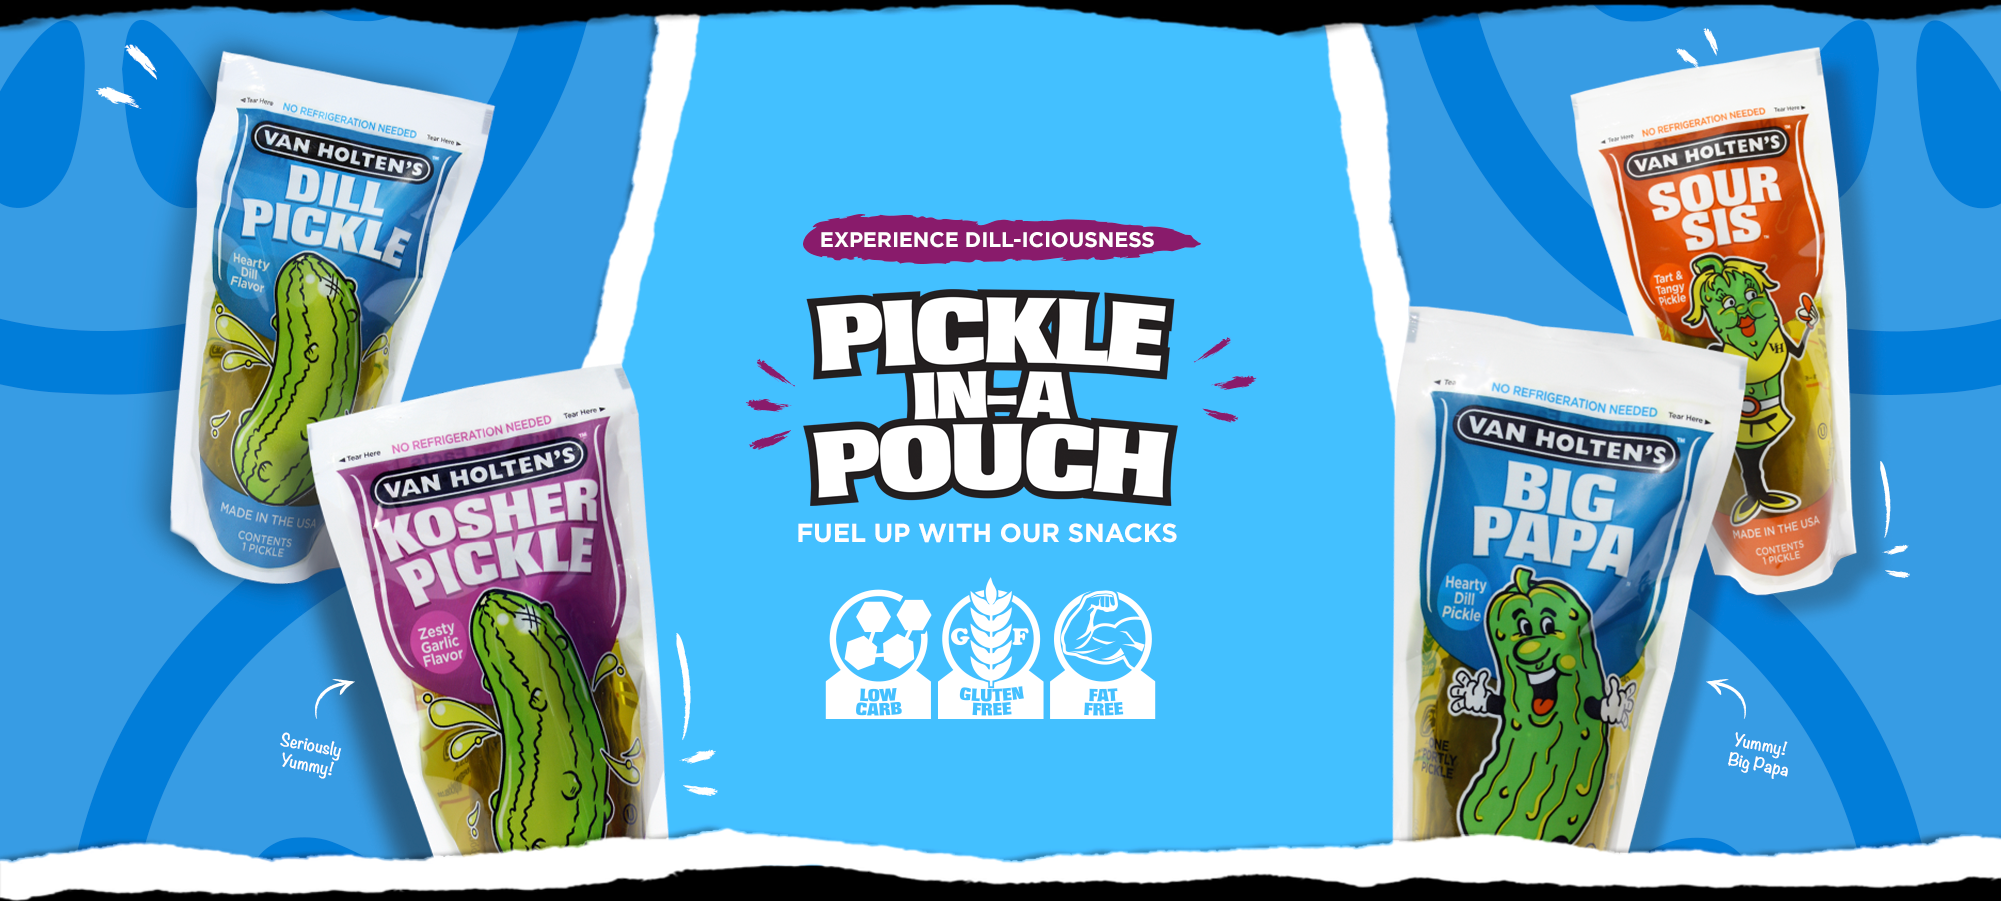 Pickle in a pouch products